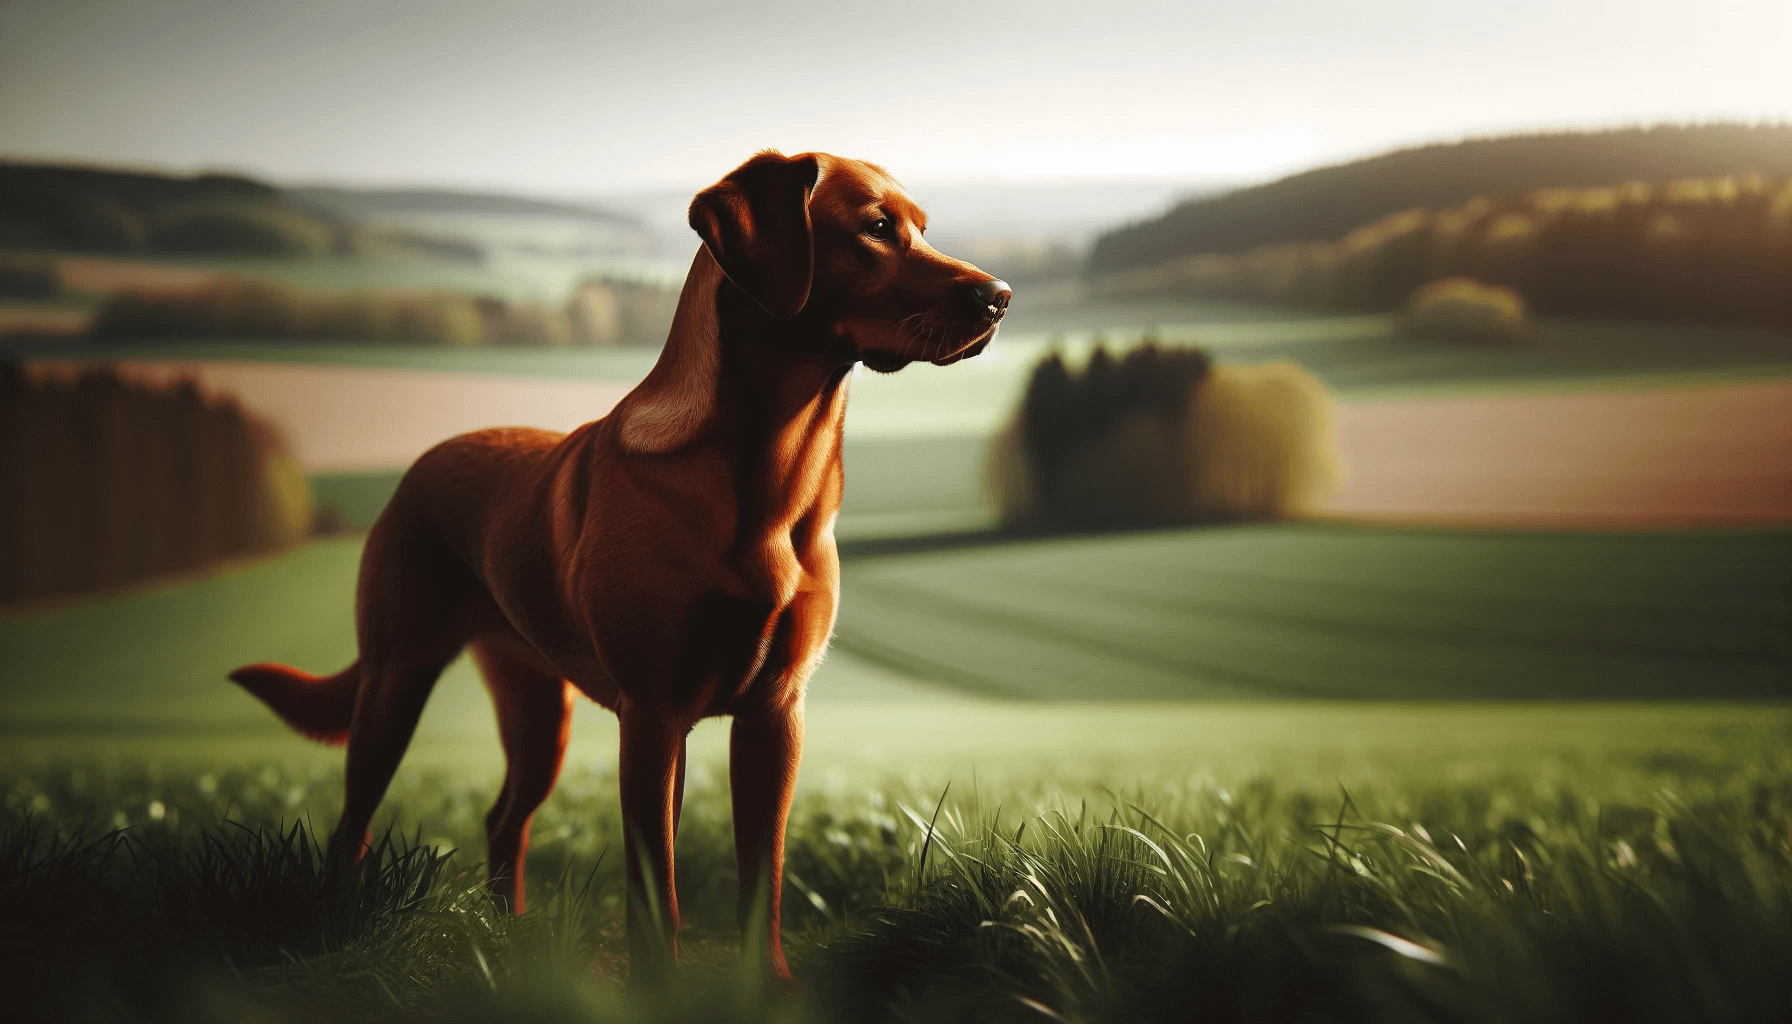 Red Fox Labrador Retriever standing in a field seen from a side profile in a 16:9 aspect ratio